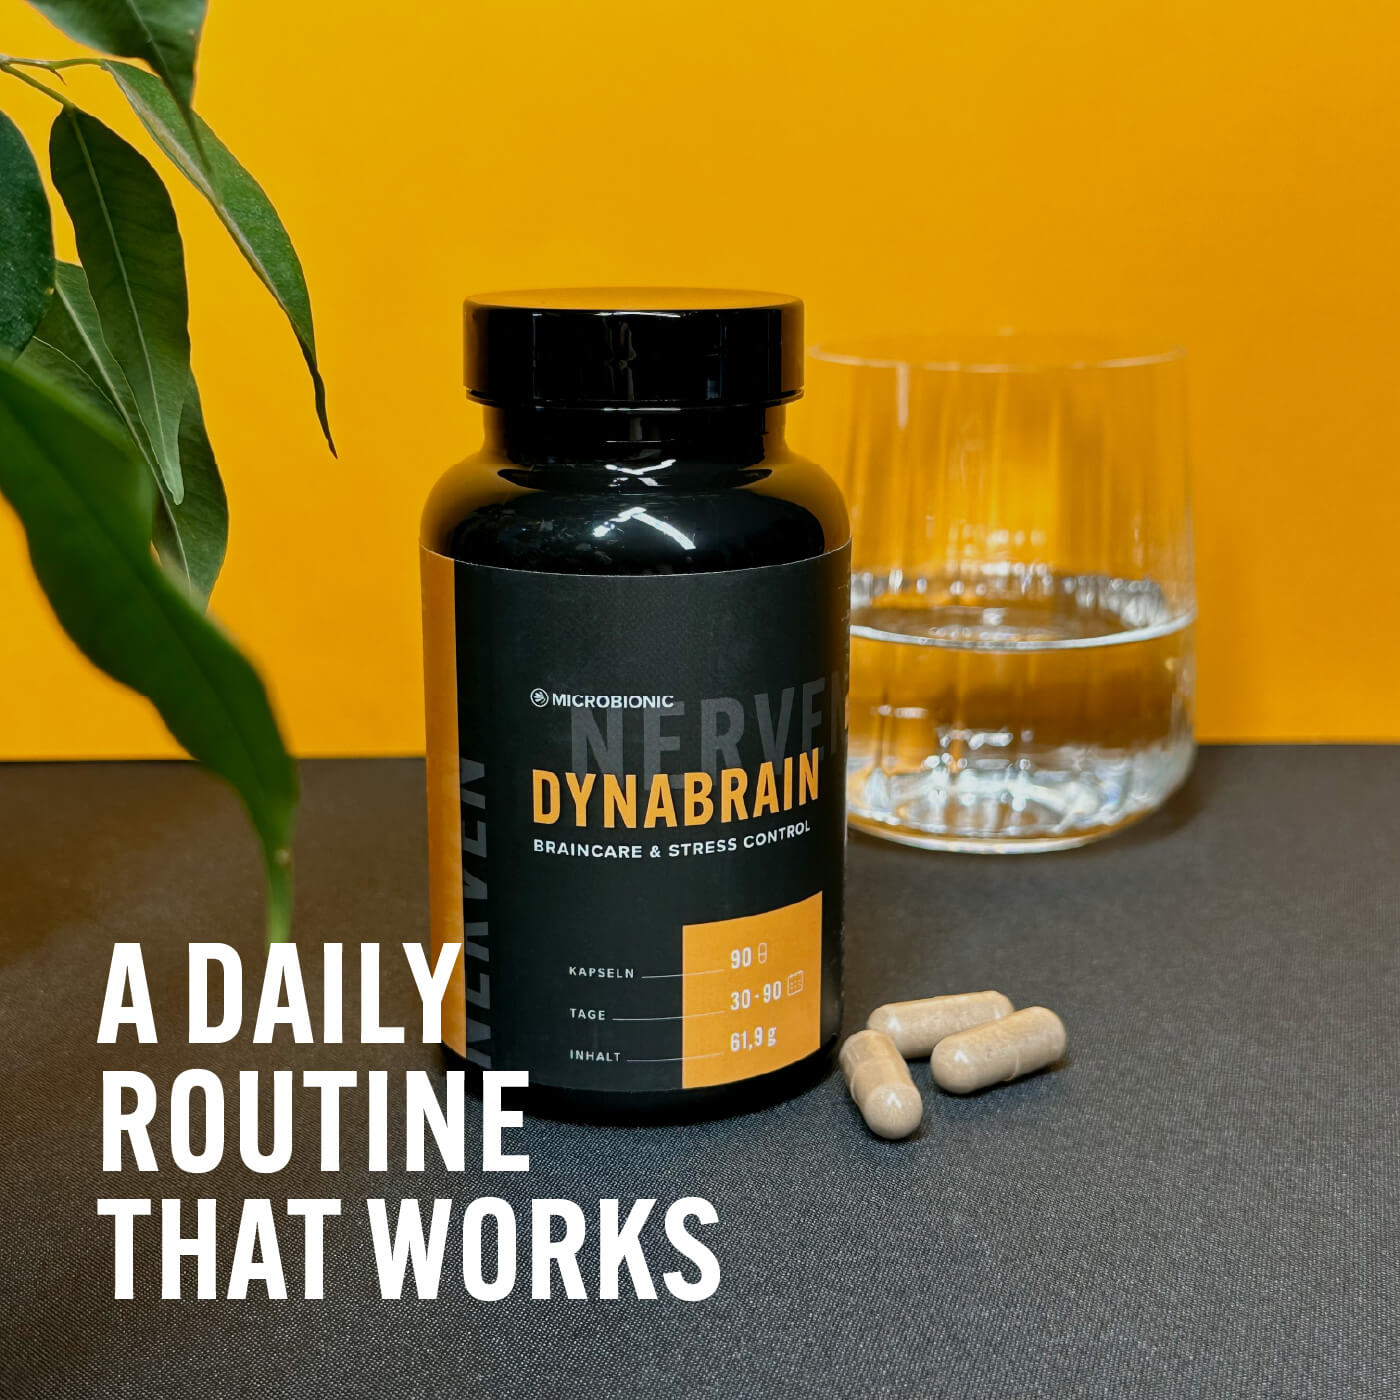 Dynabrain – A Daily Routine That Works